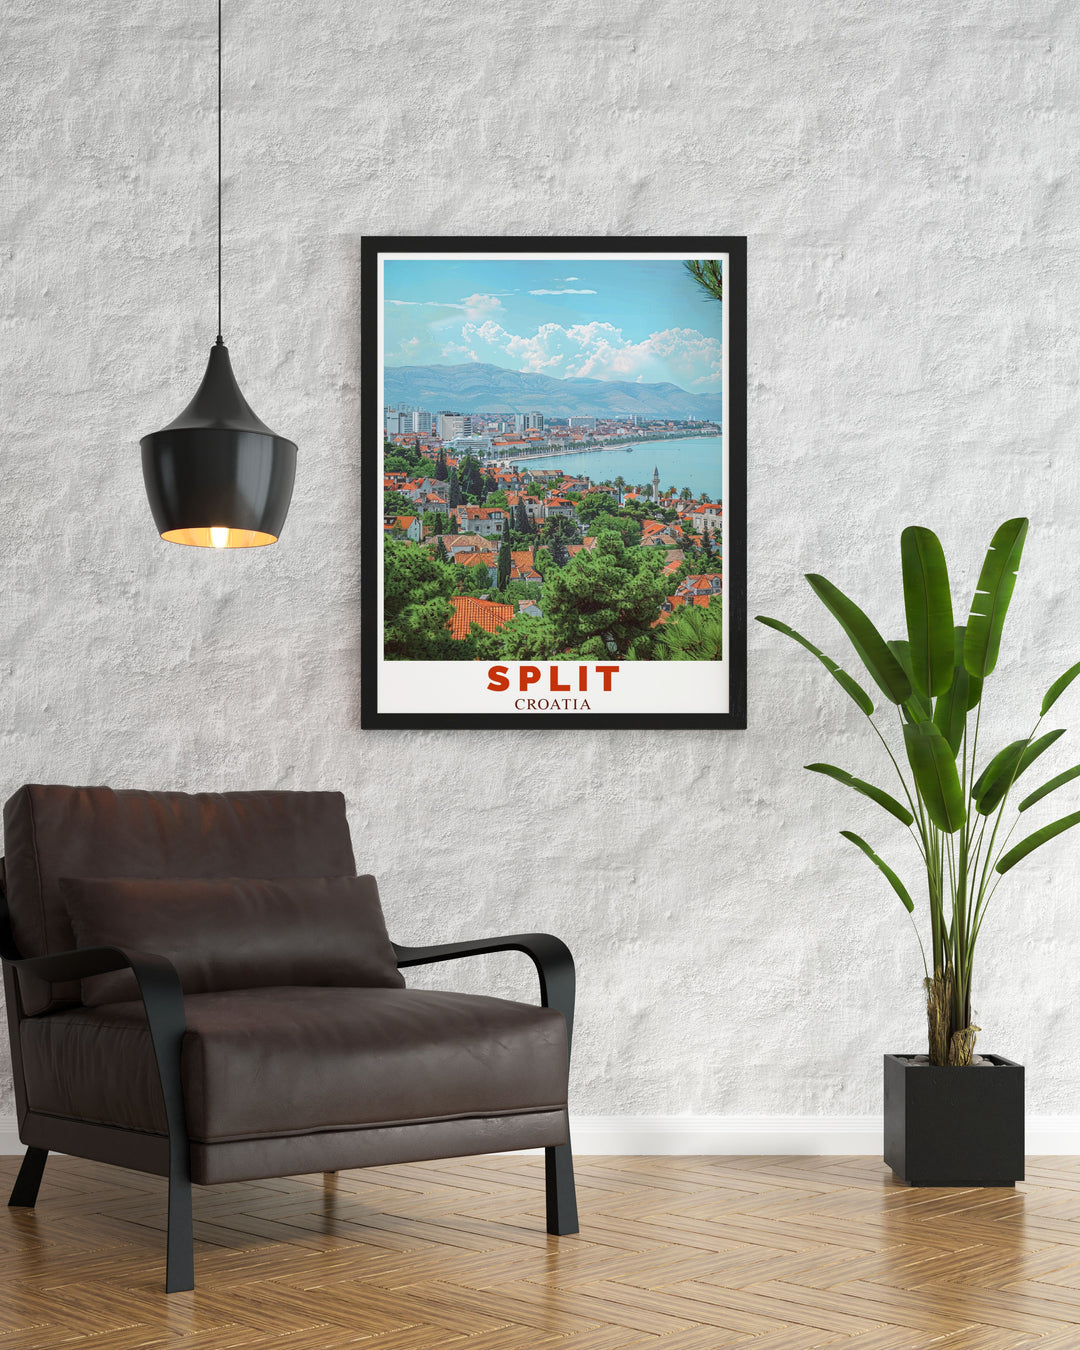 This vintage inspired poster of Split captures the essence of its rich cultural heritage and stunning hilltop landmarks, offering a glimpse into one of Europes most enchanting destinations.